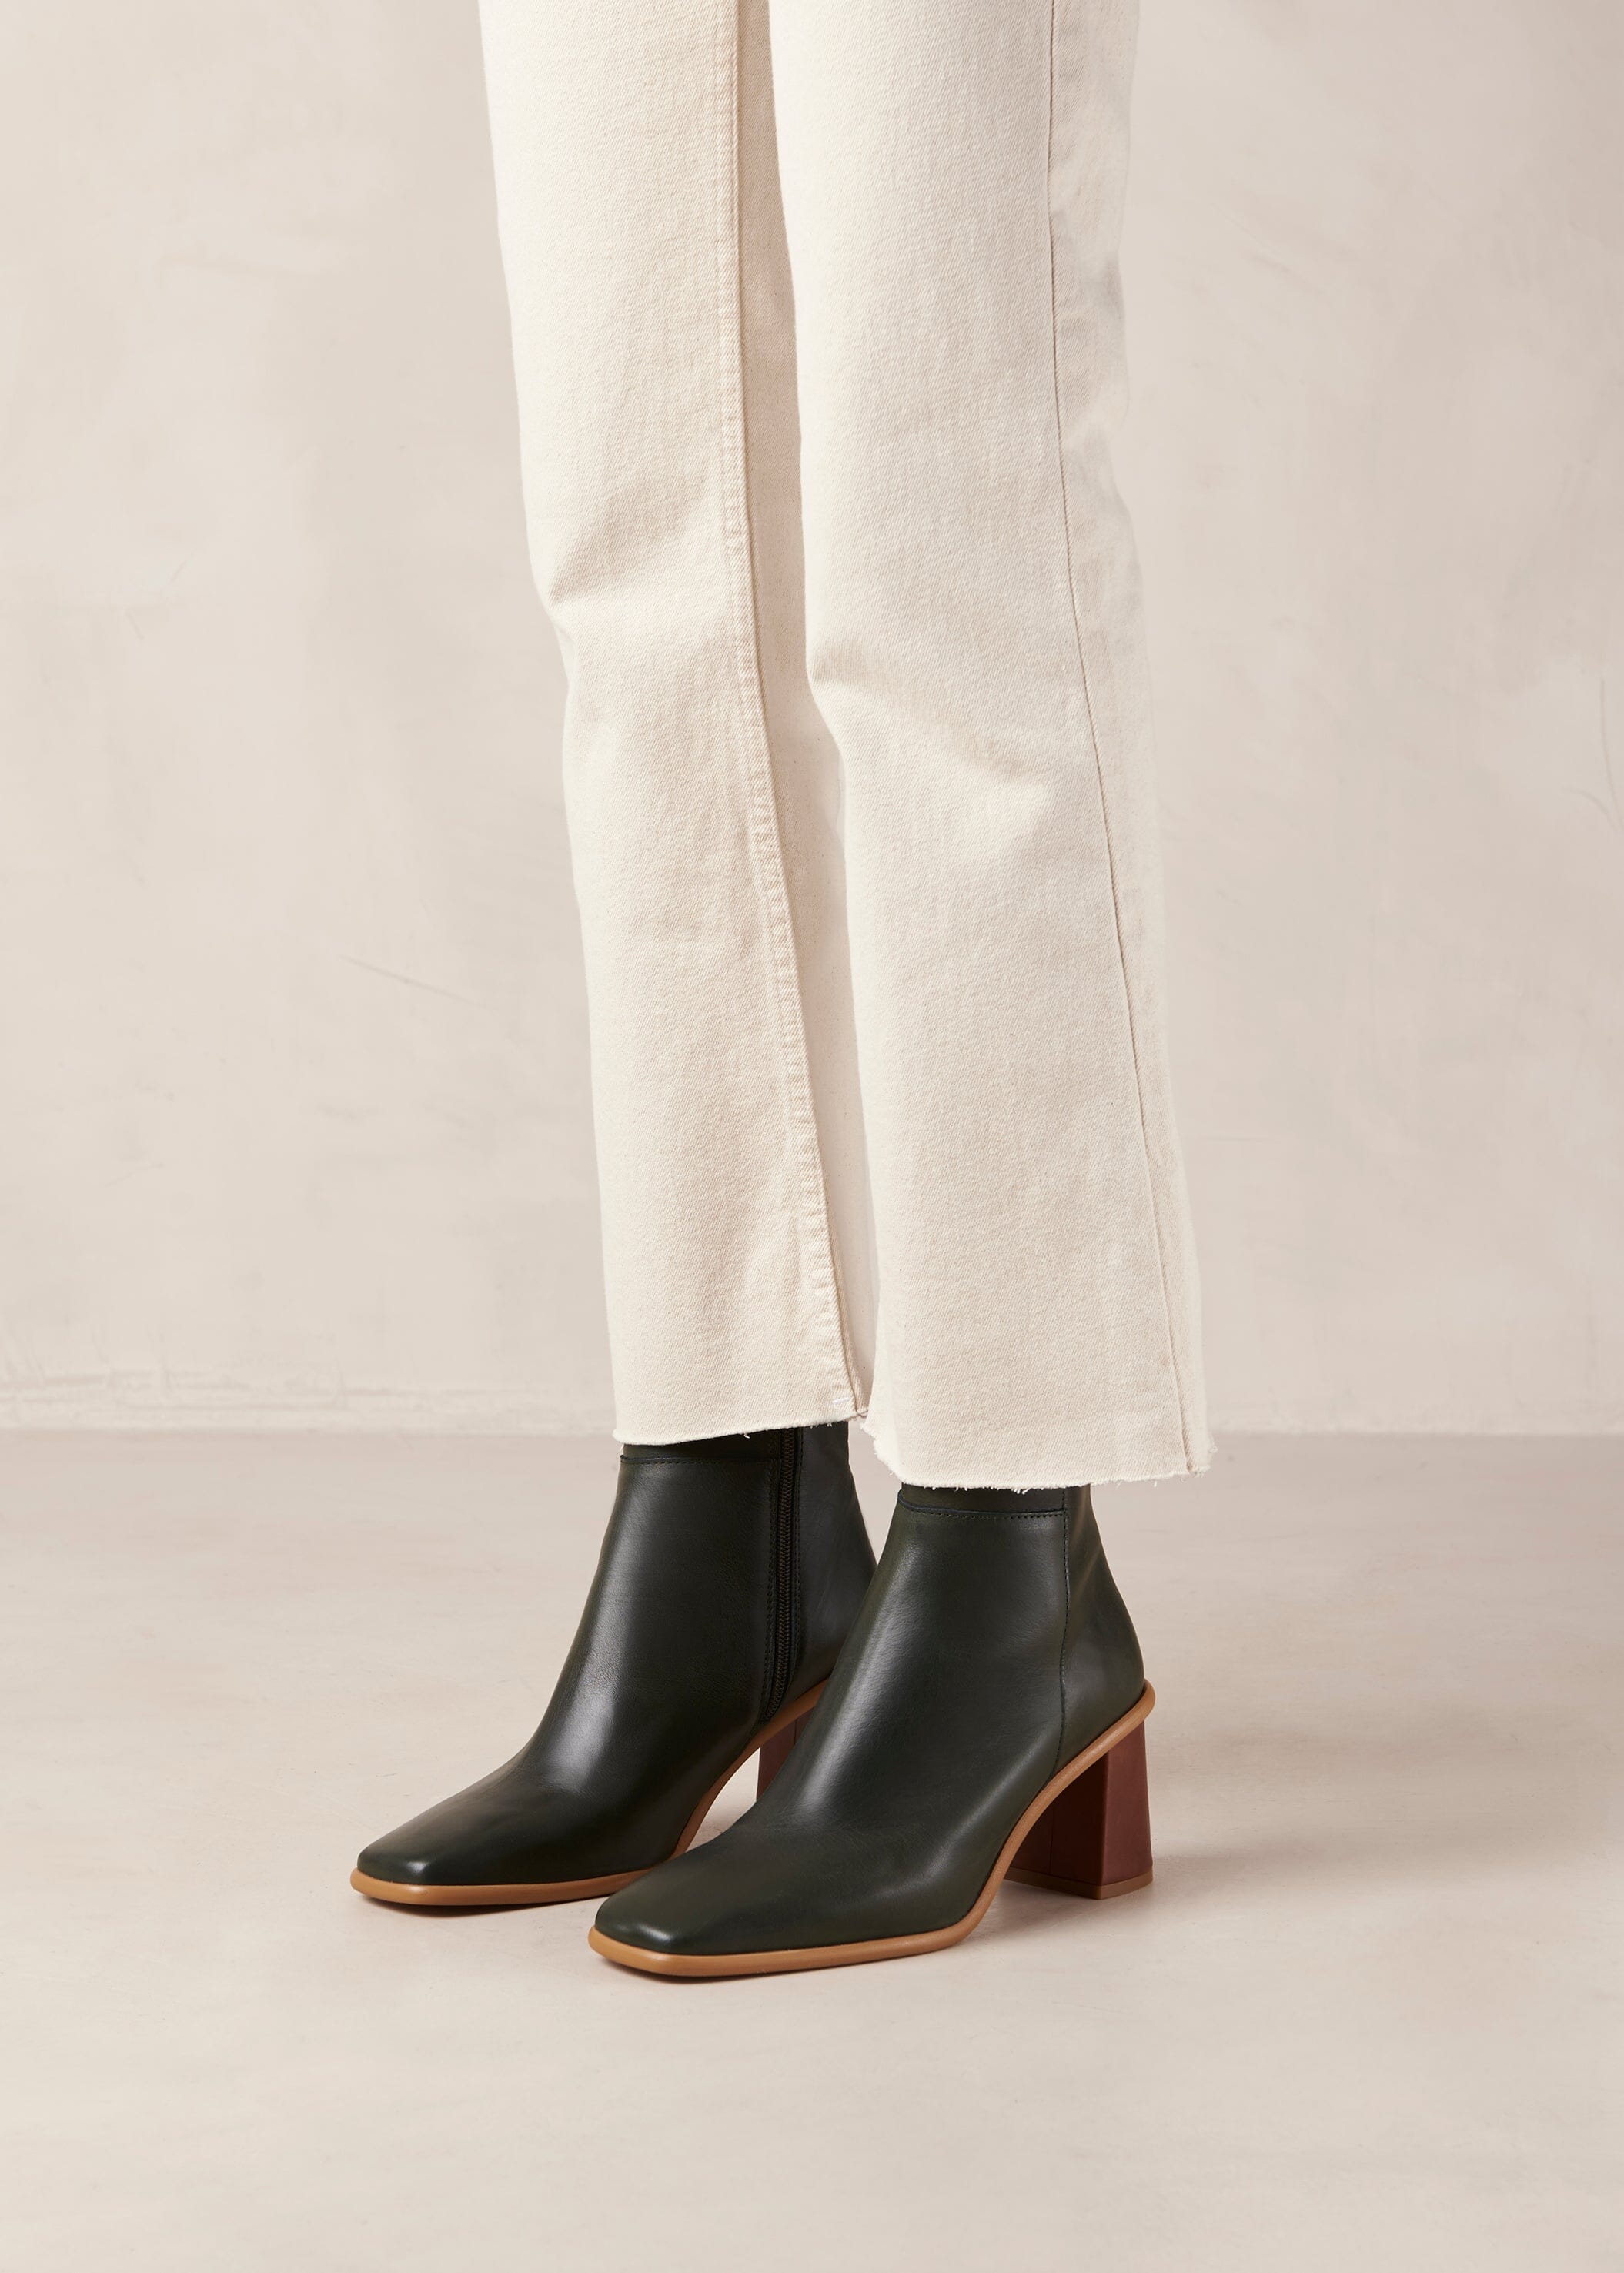 West - Green Leather Boots | ALOHAS